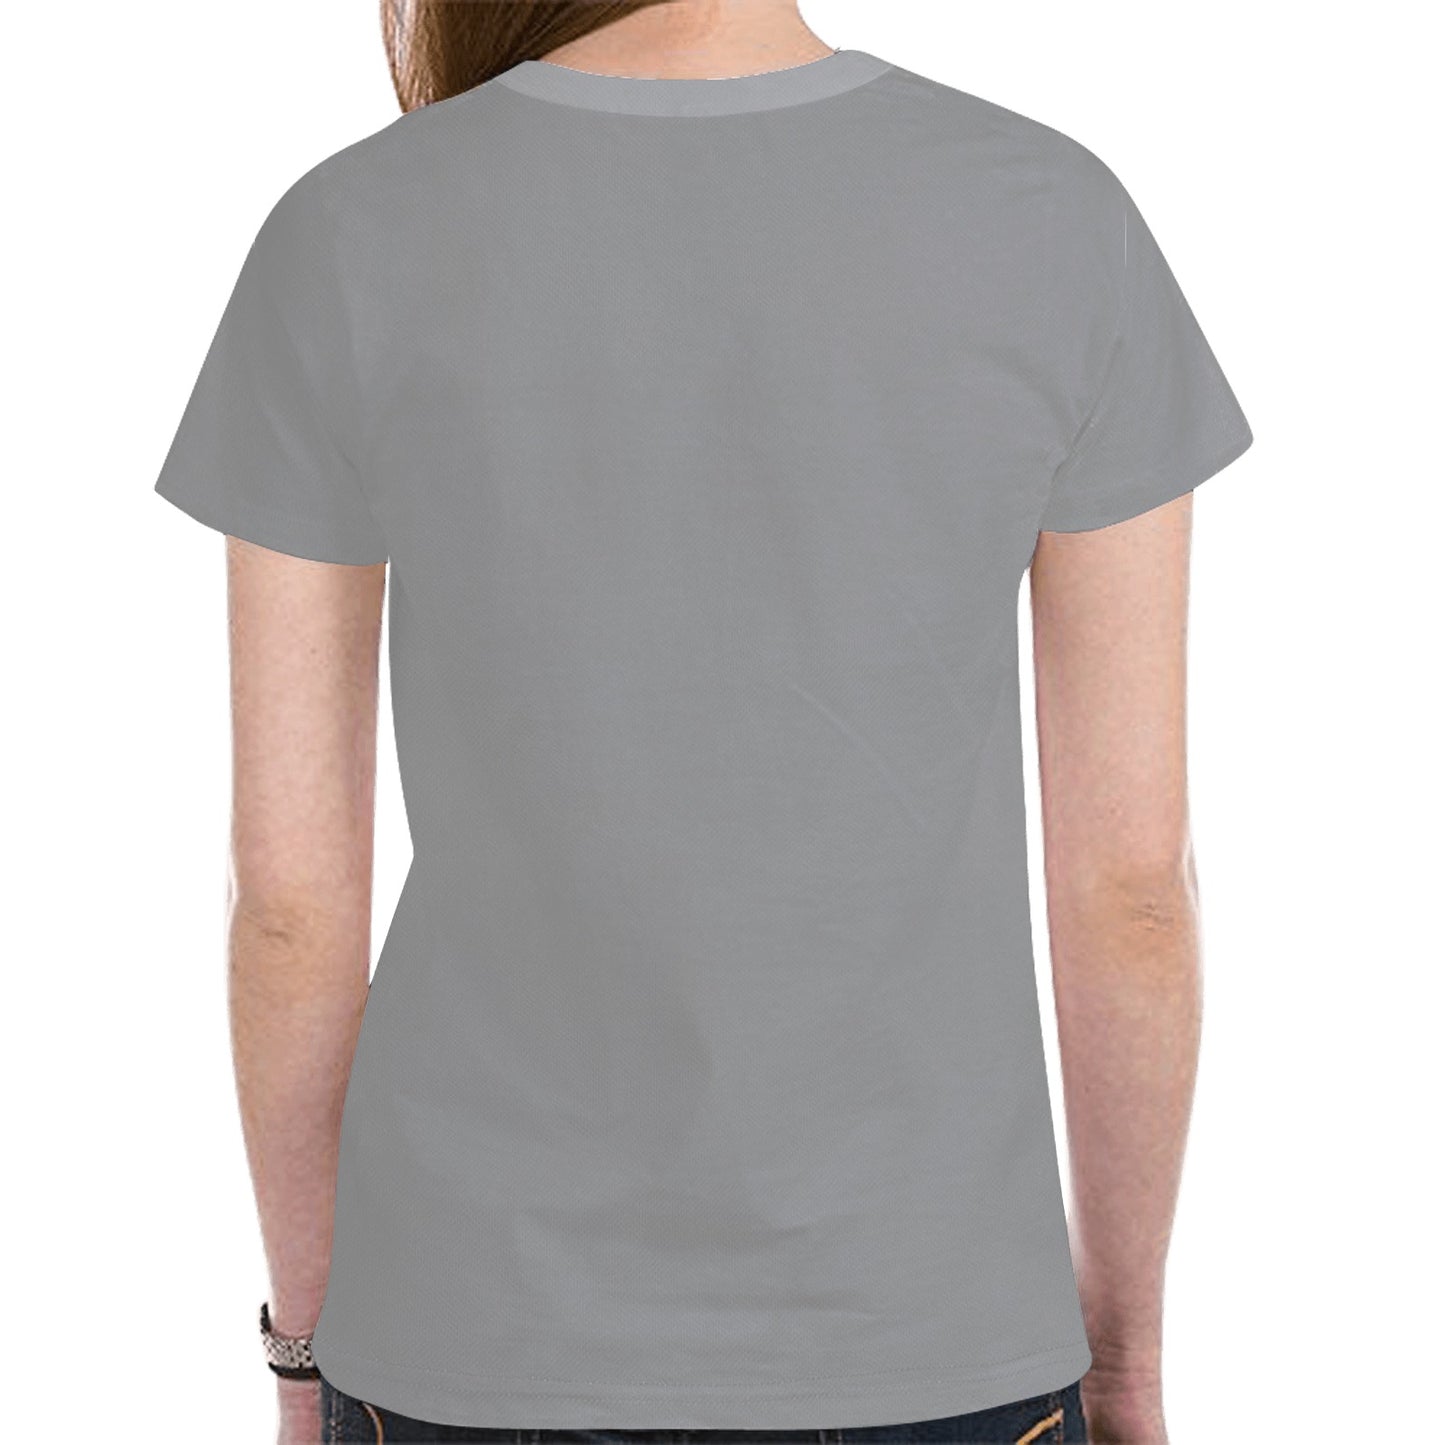 RTMColors#7-1 T-shirt for Women